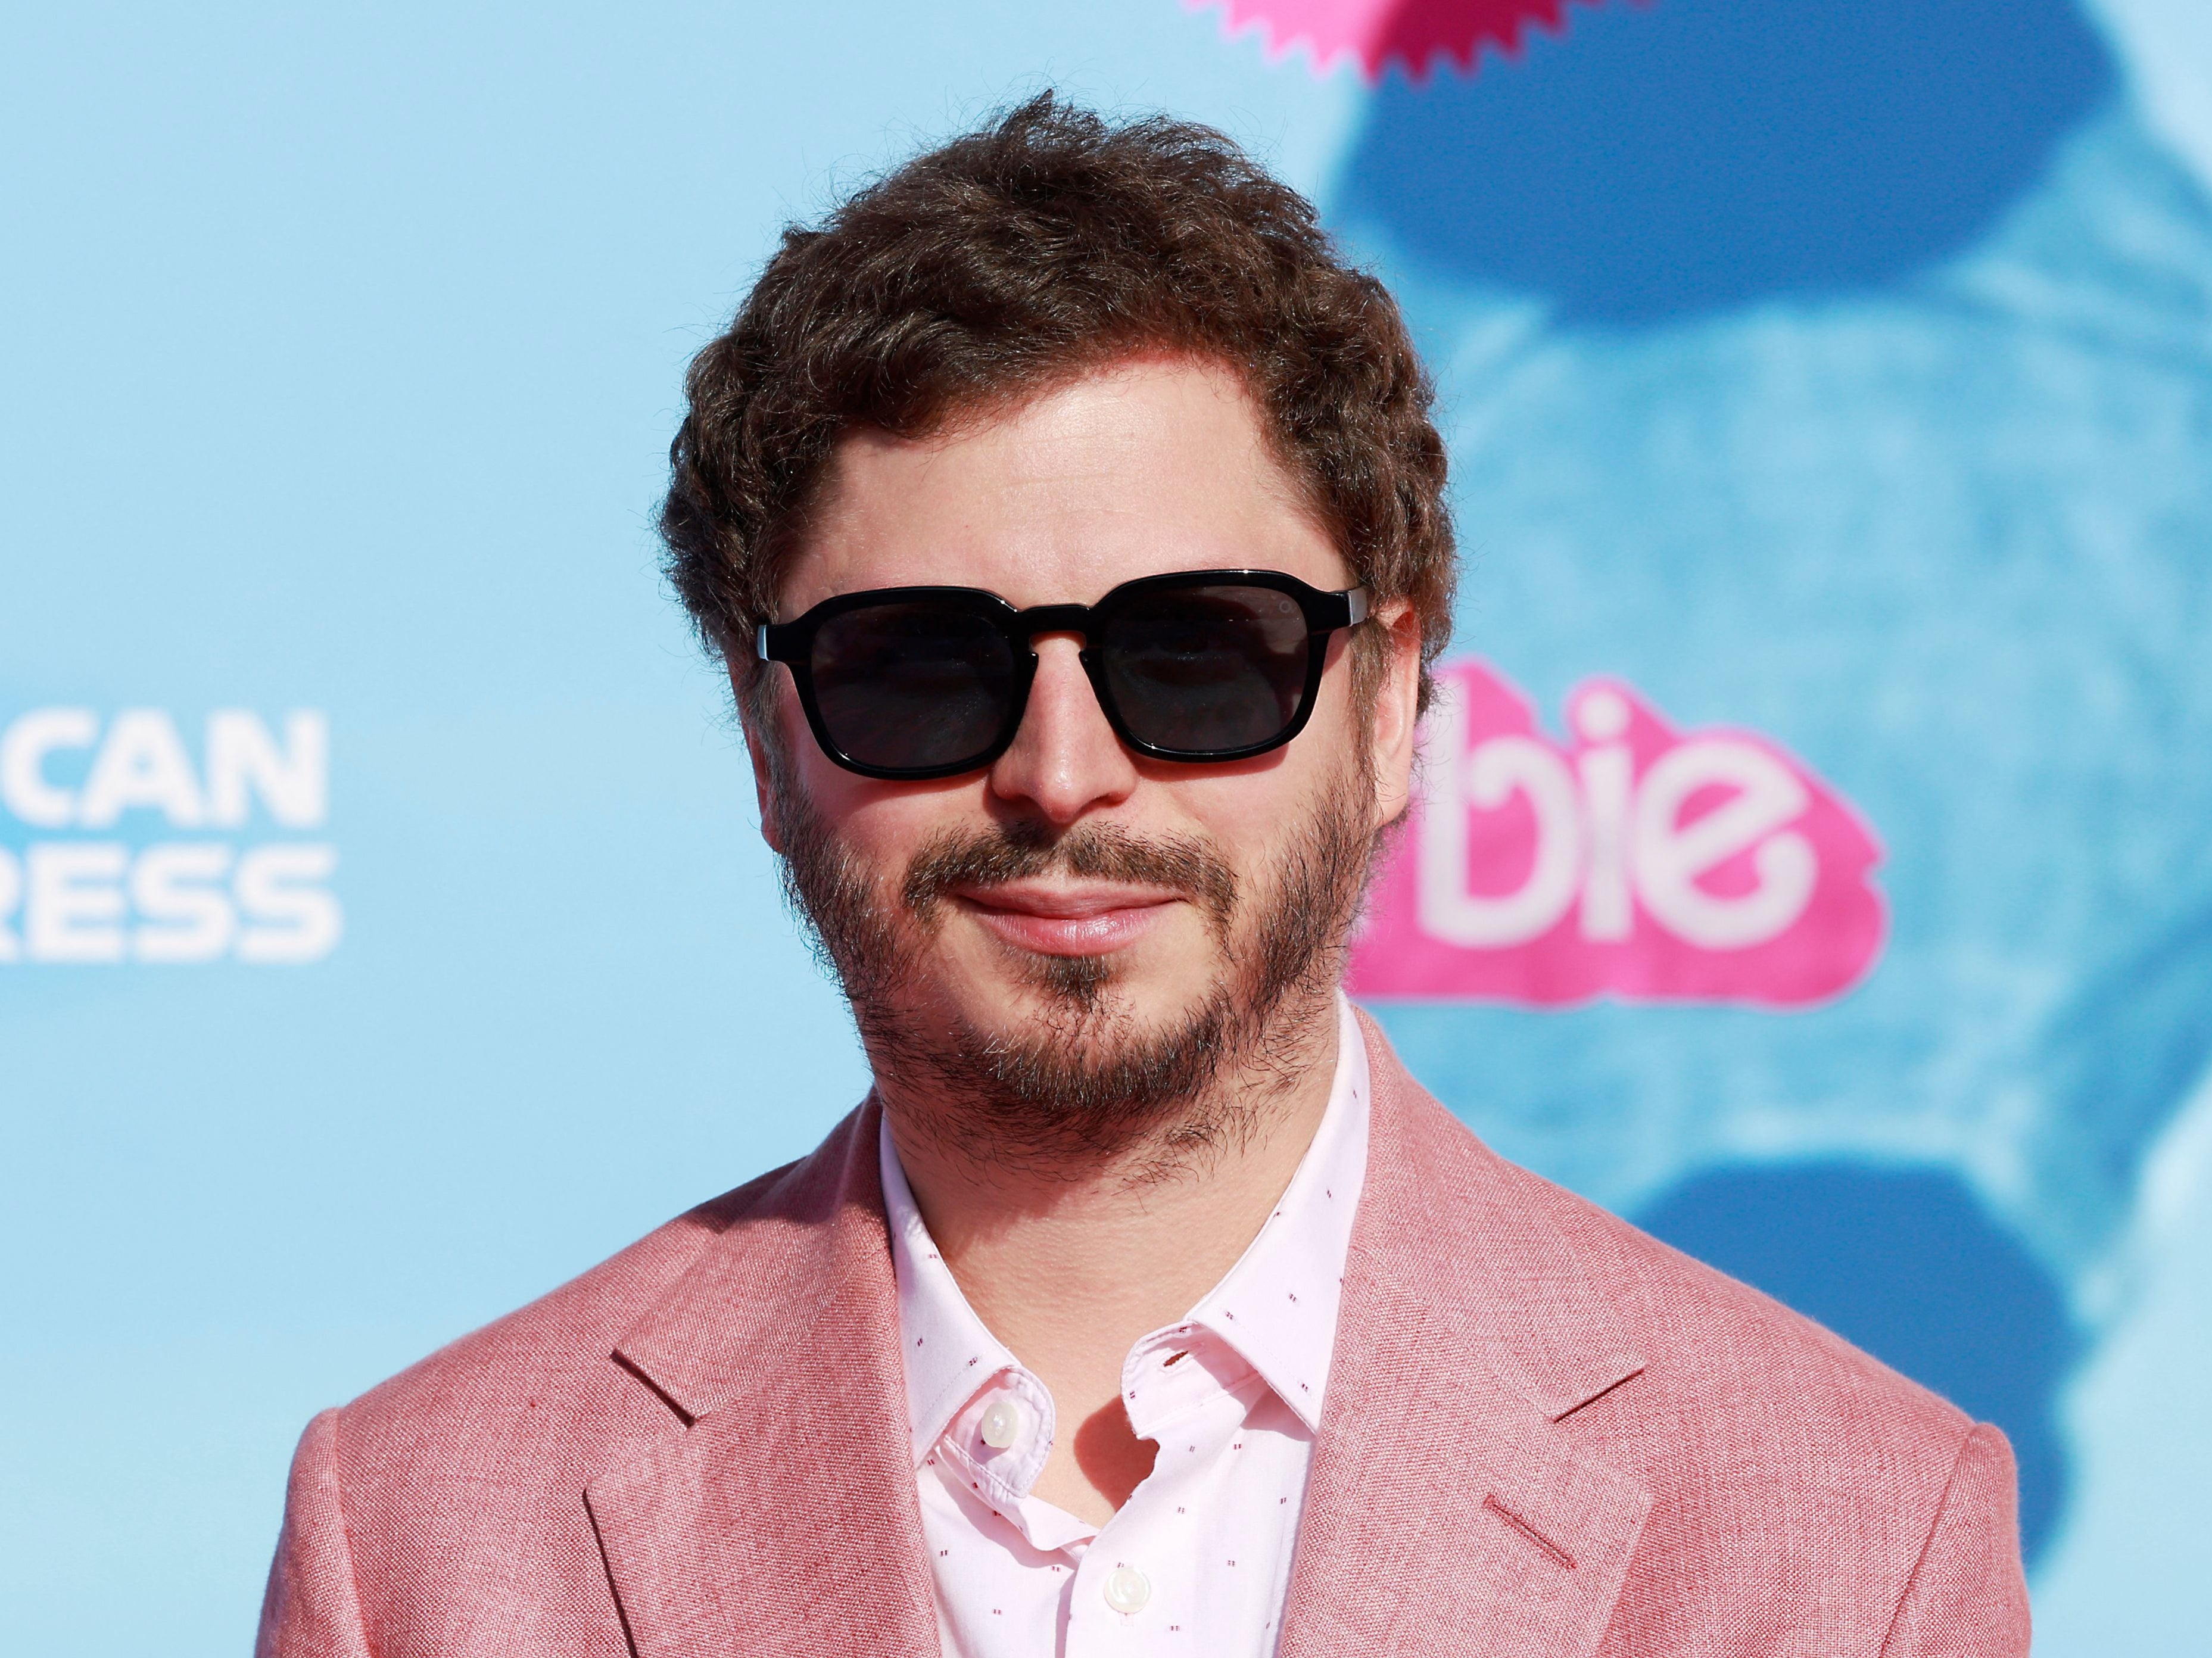 Michael Cera pictured at the world premiere of ‘Barbie'